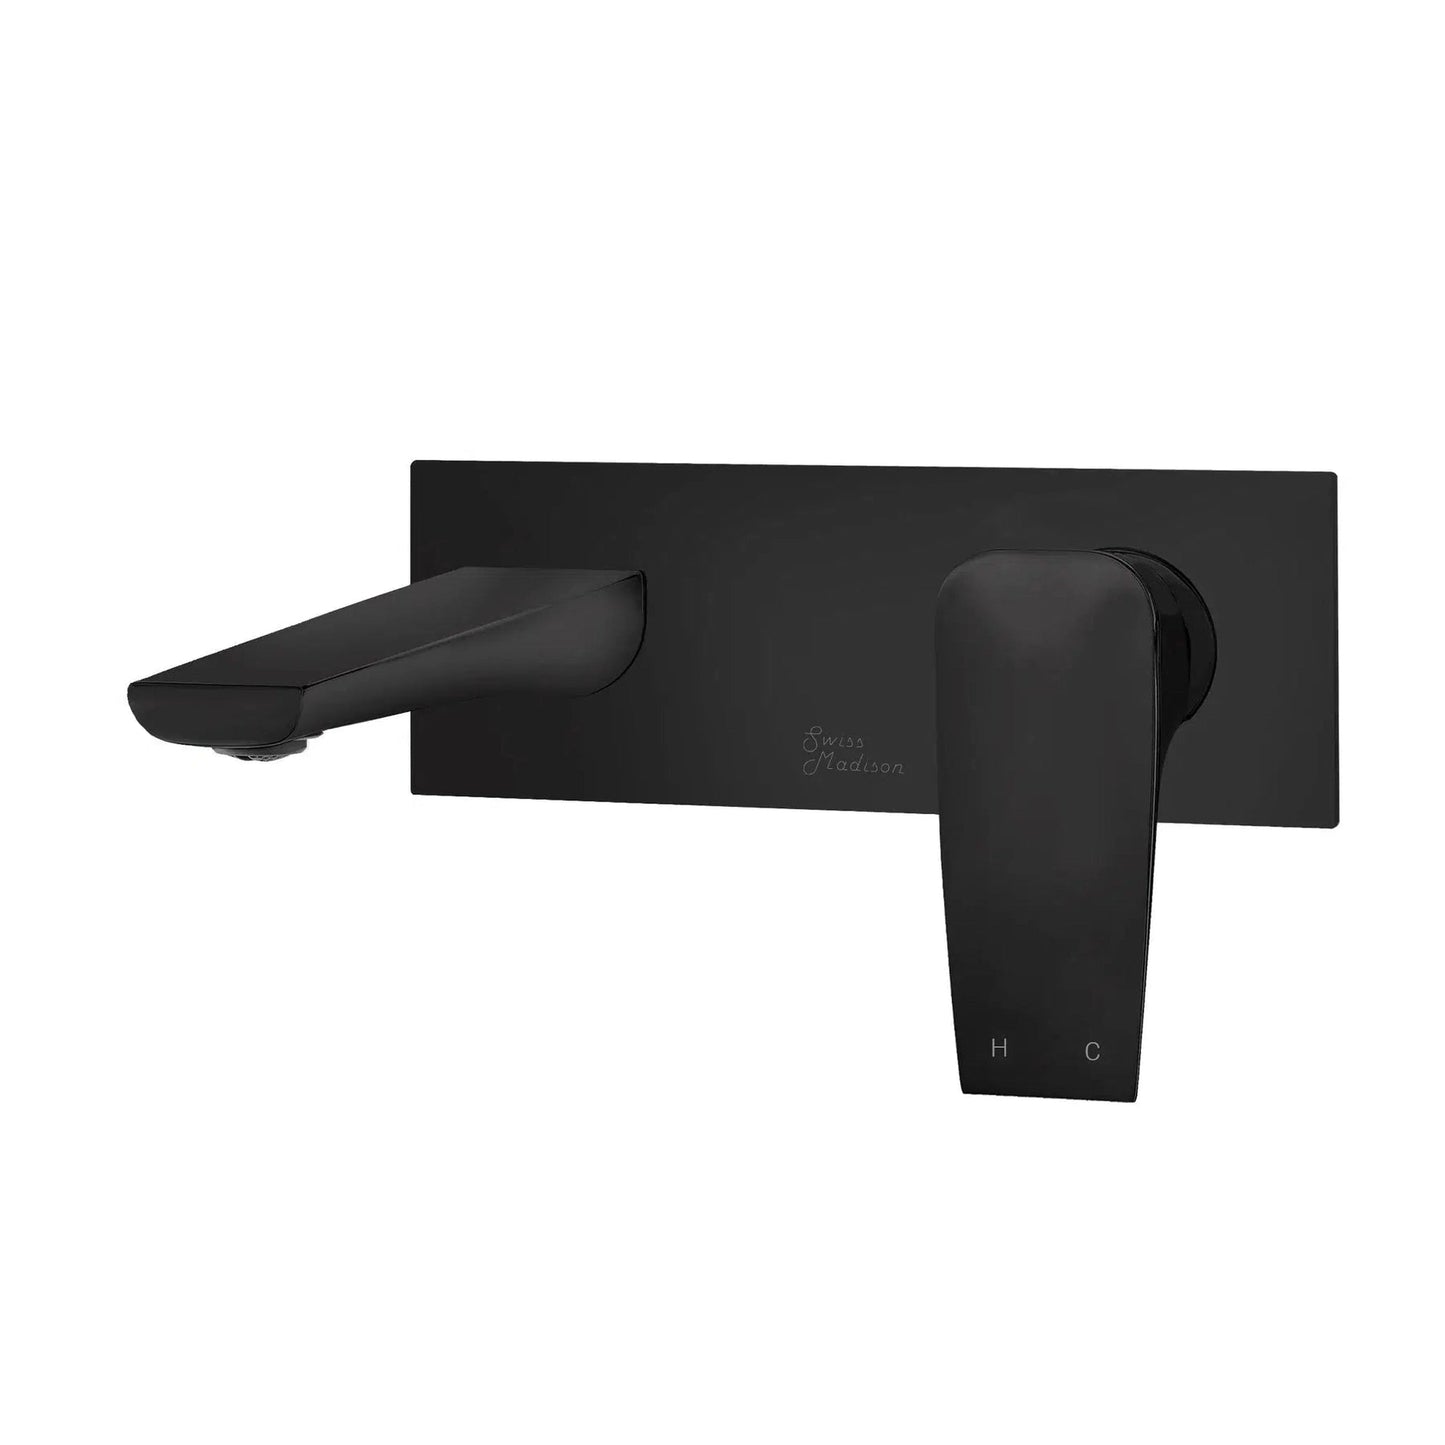 Swiss Madison Monaco 8" Matte Black Two Hole Wall-Mounted Bathroom Faucet With Single Lever Handle and 1.2 GPM Flow Rate